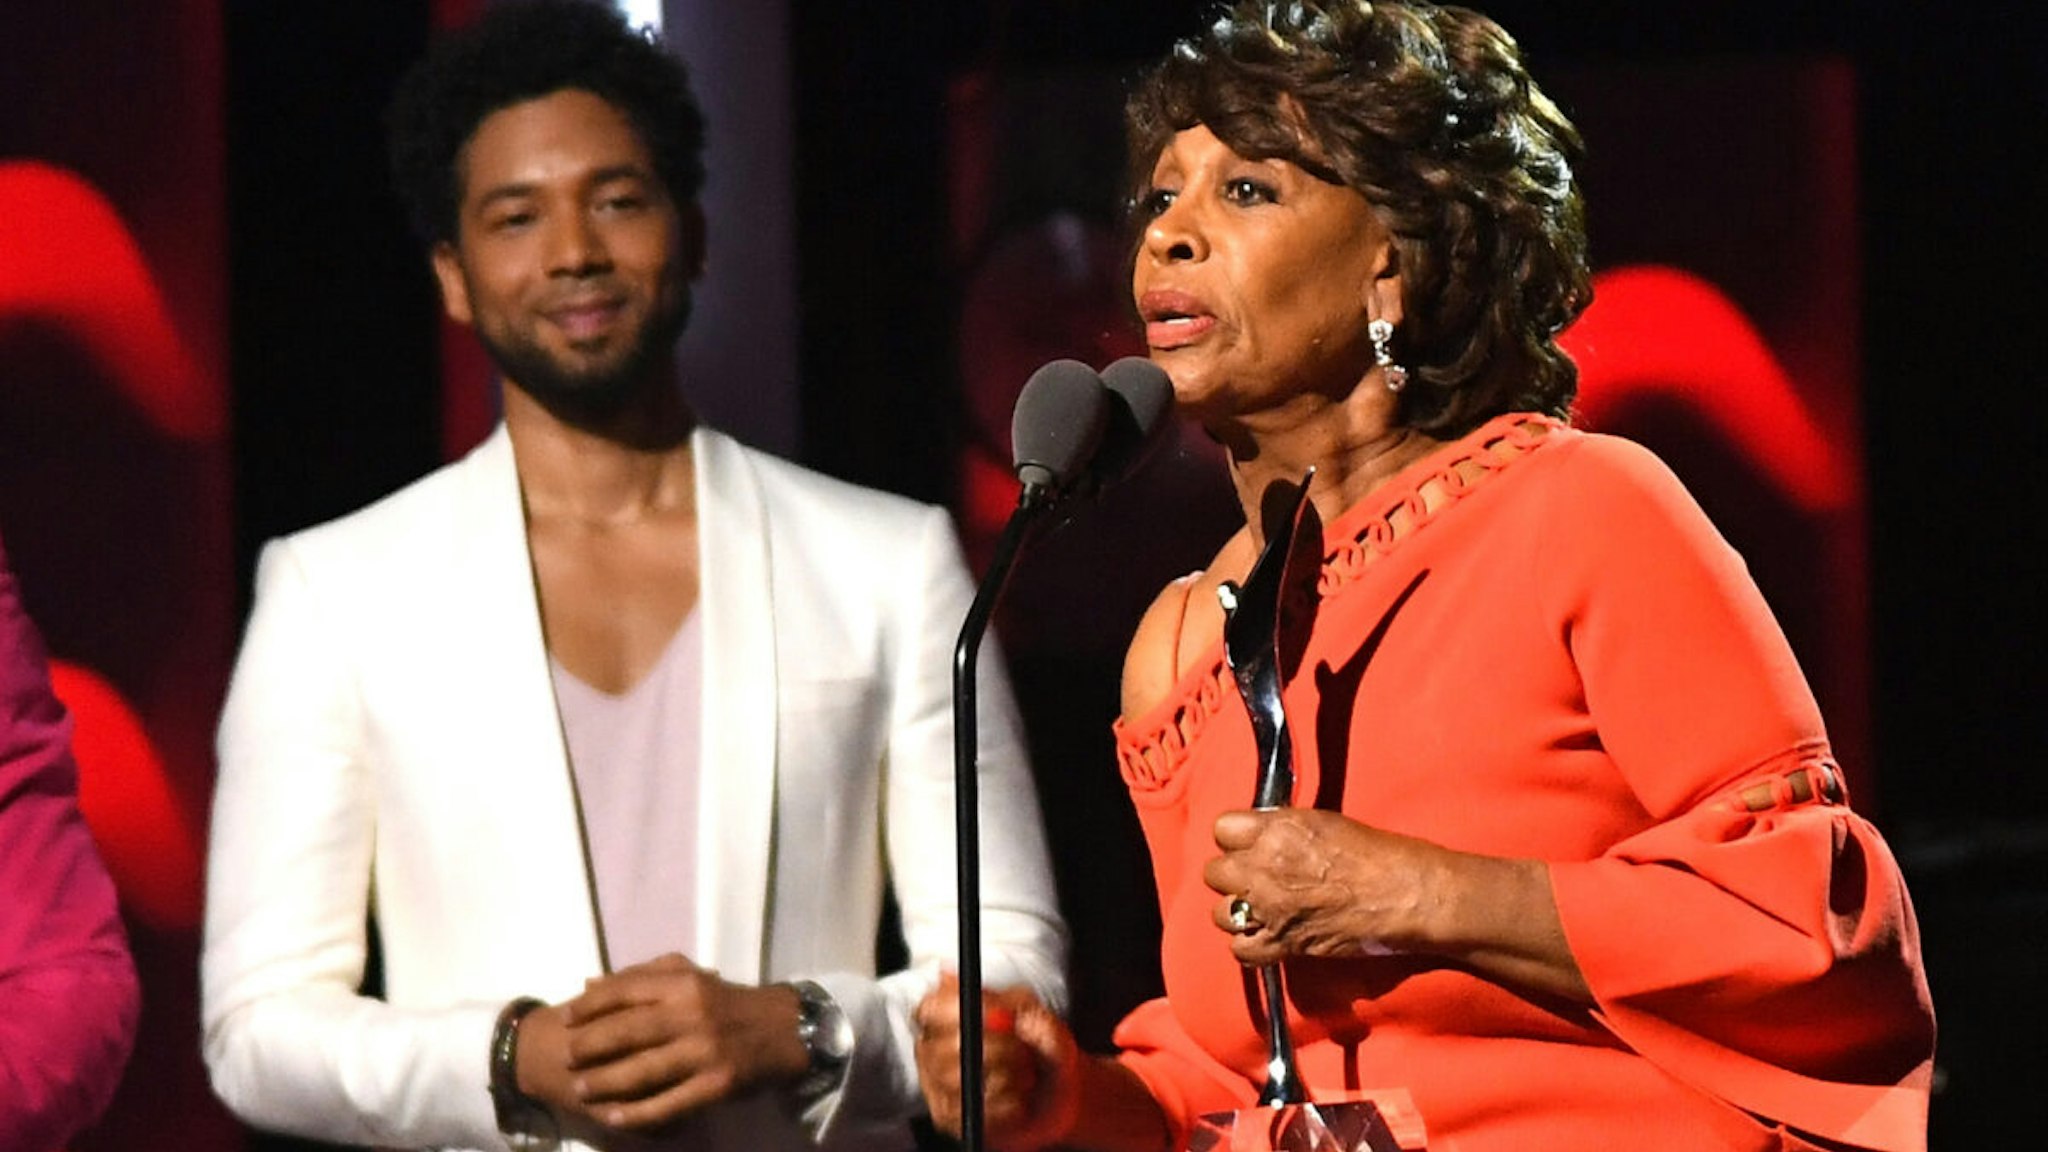 Laz Alonso, Jussie Smollett, and Honoree Congresswoman Maxine Waters speak onstage during Black Girls Rock! 2017 at NJPAC on August 5, 2017 in Newark, New Jersey.